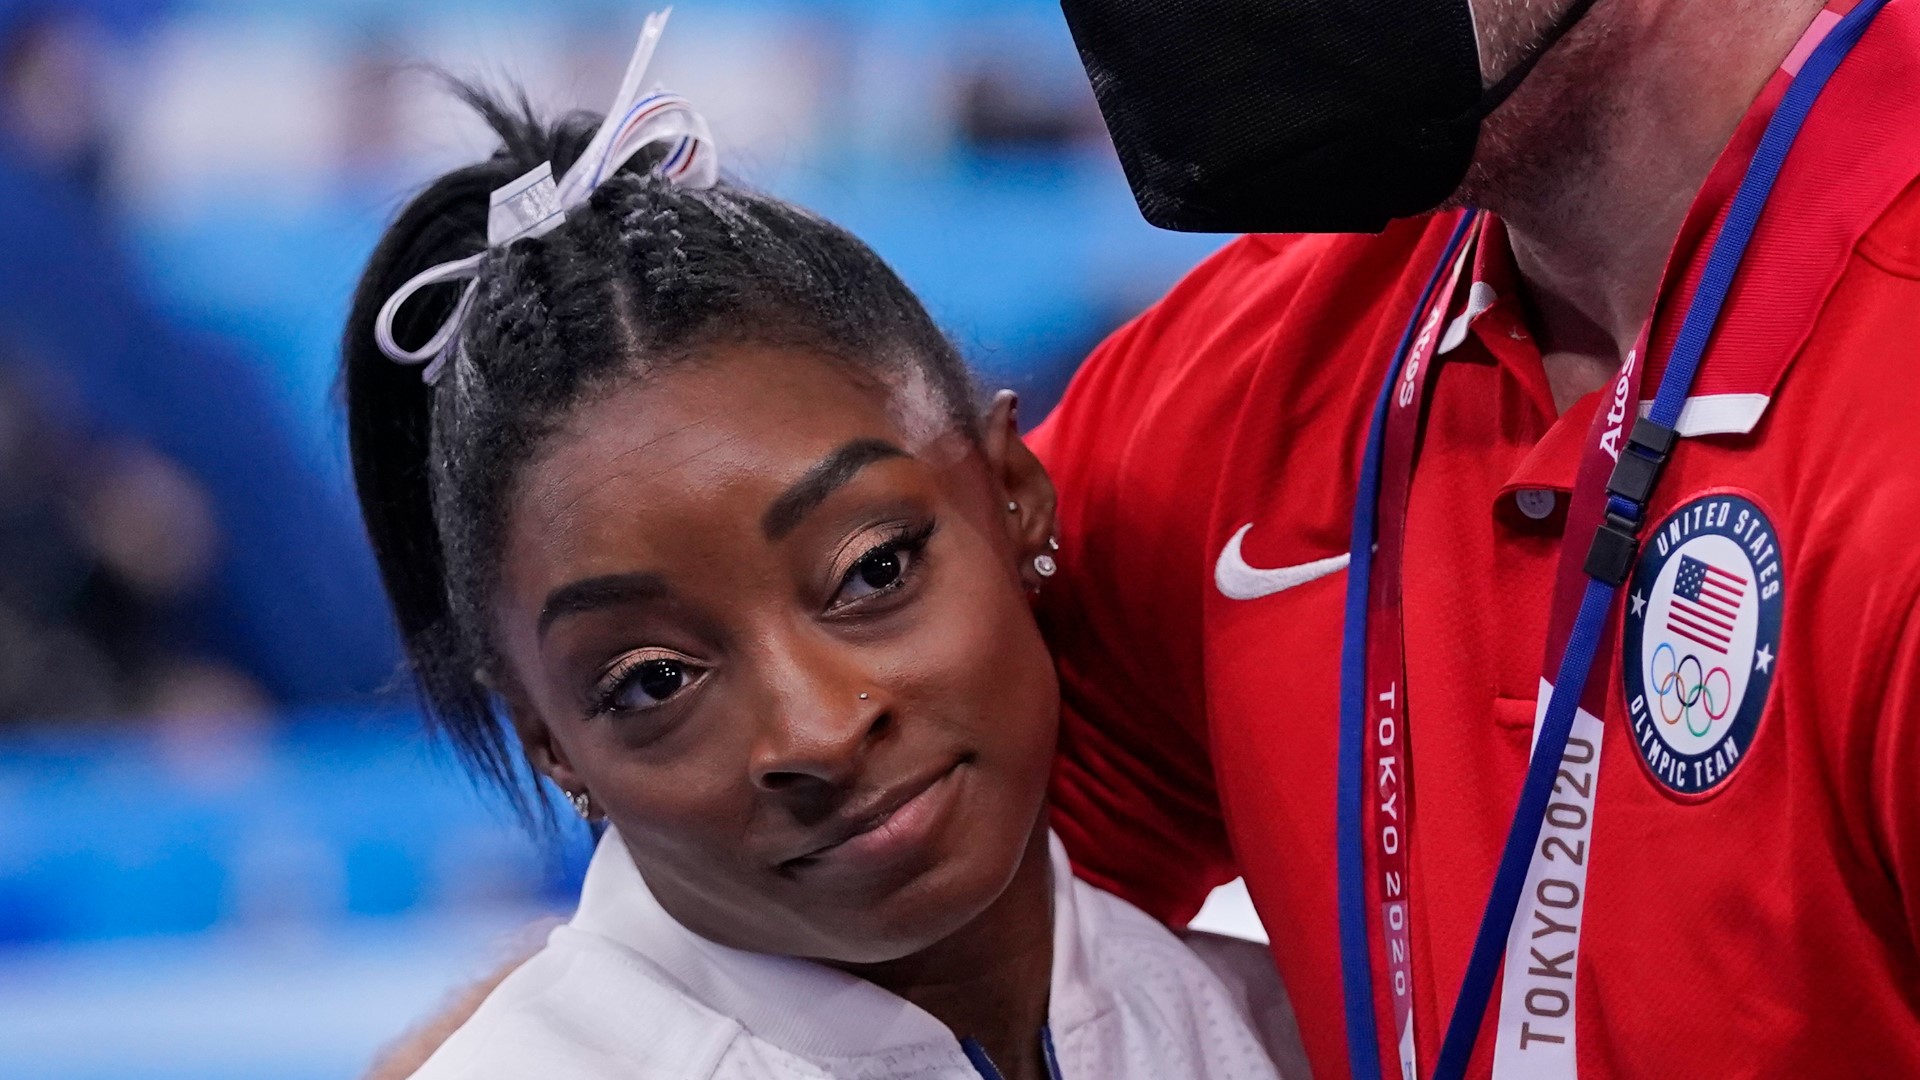 She posted on social media on Monday that she felt the weight of the world on her shoulders. We're rooting for you, Simone!